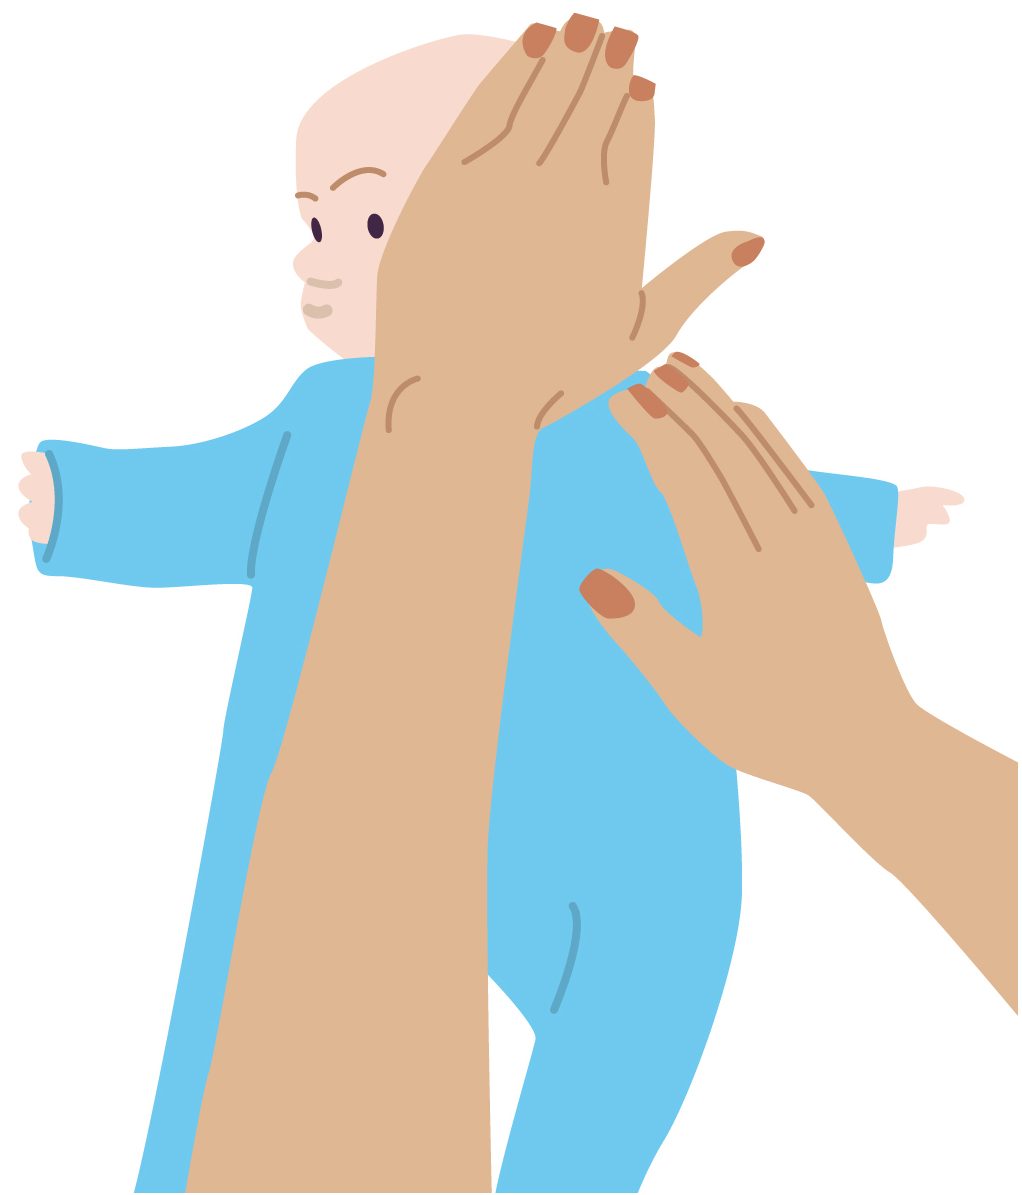 Illustration of baby laid on their back with someone holding their chest and head